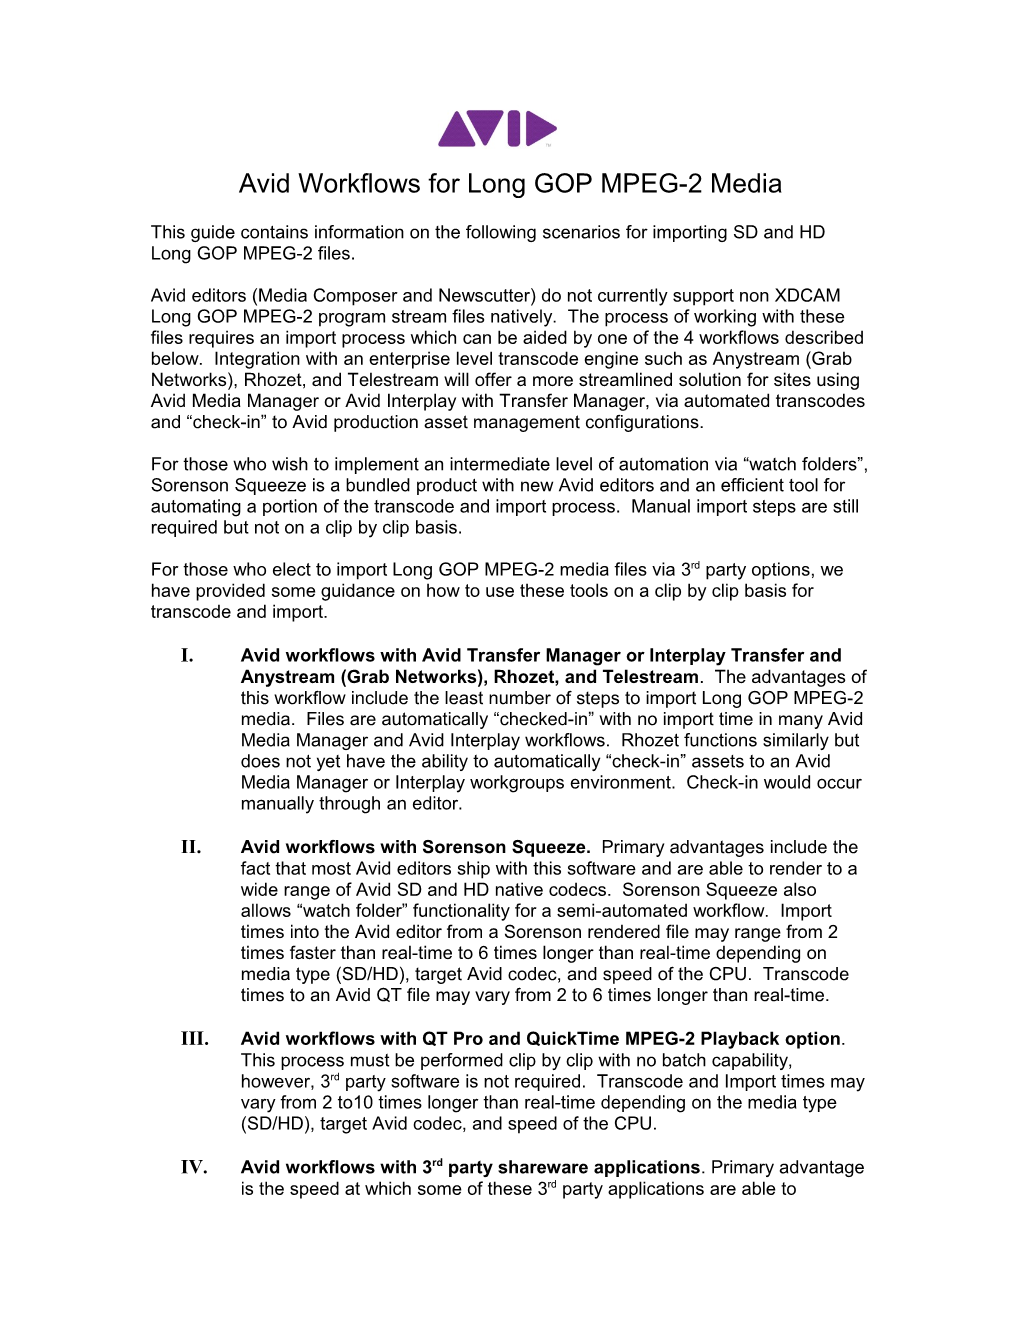 Avid Workflows for Long GOP MPEG-2 Media